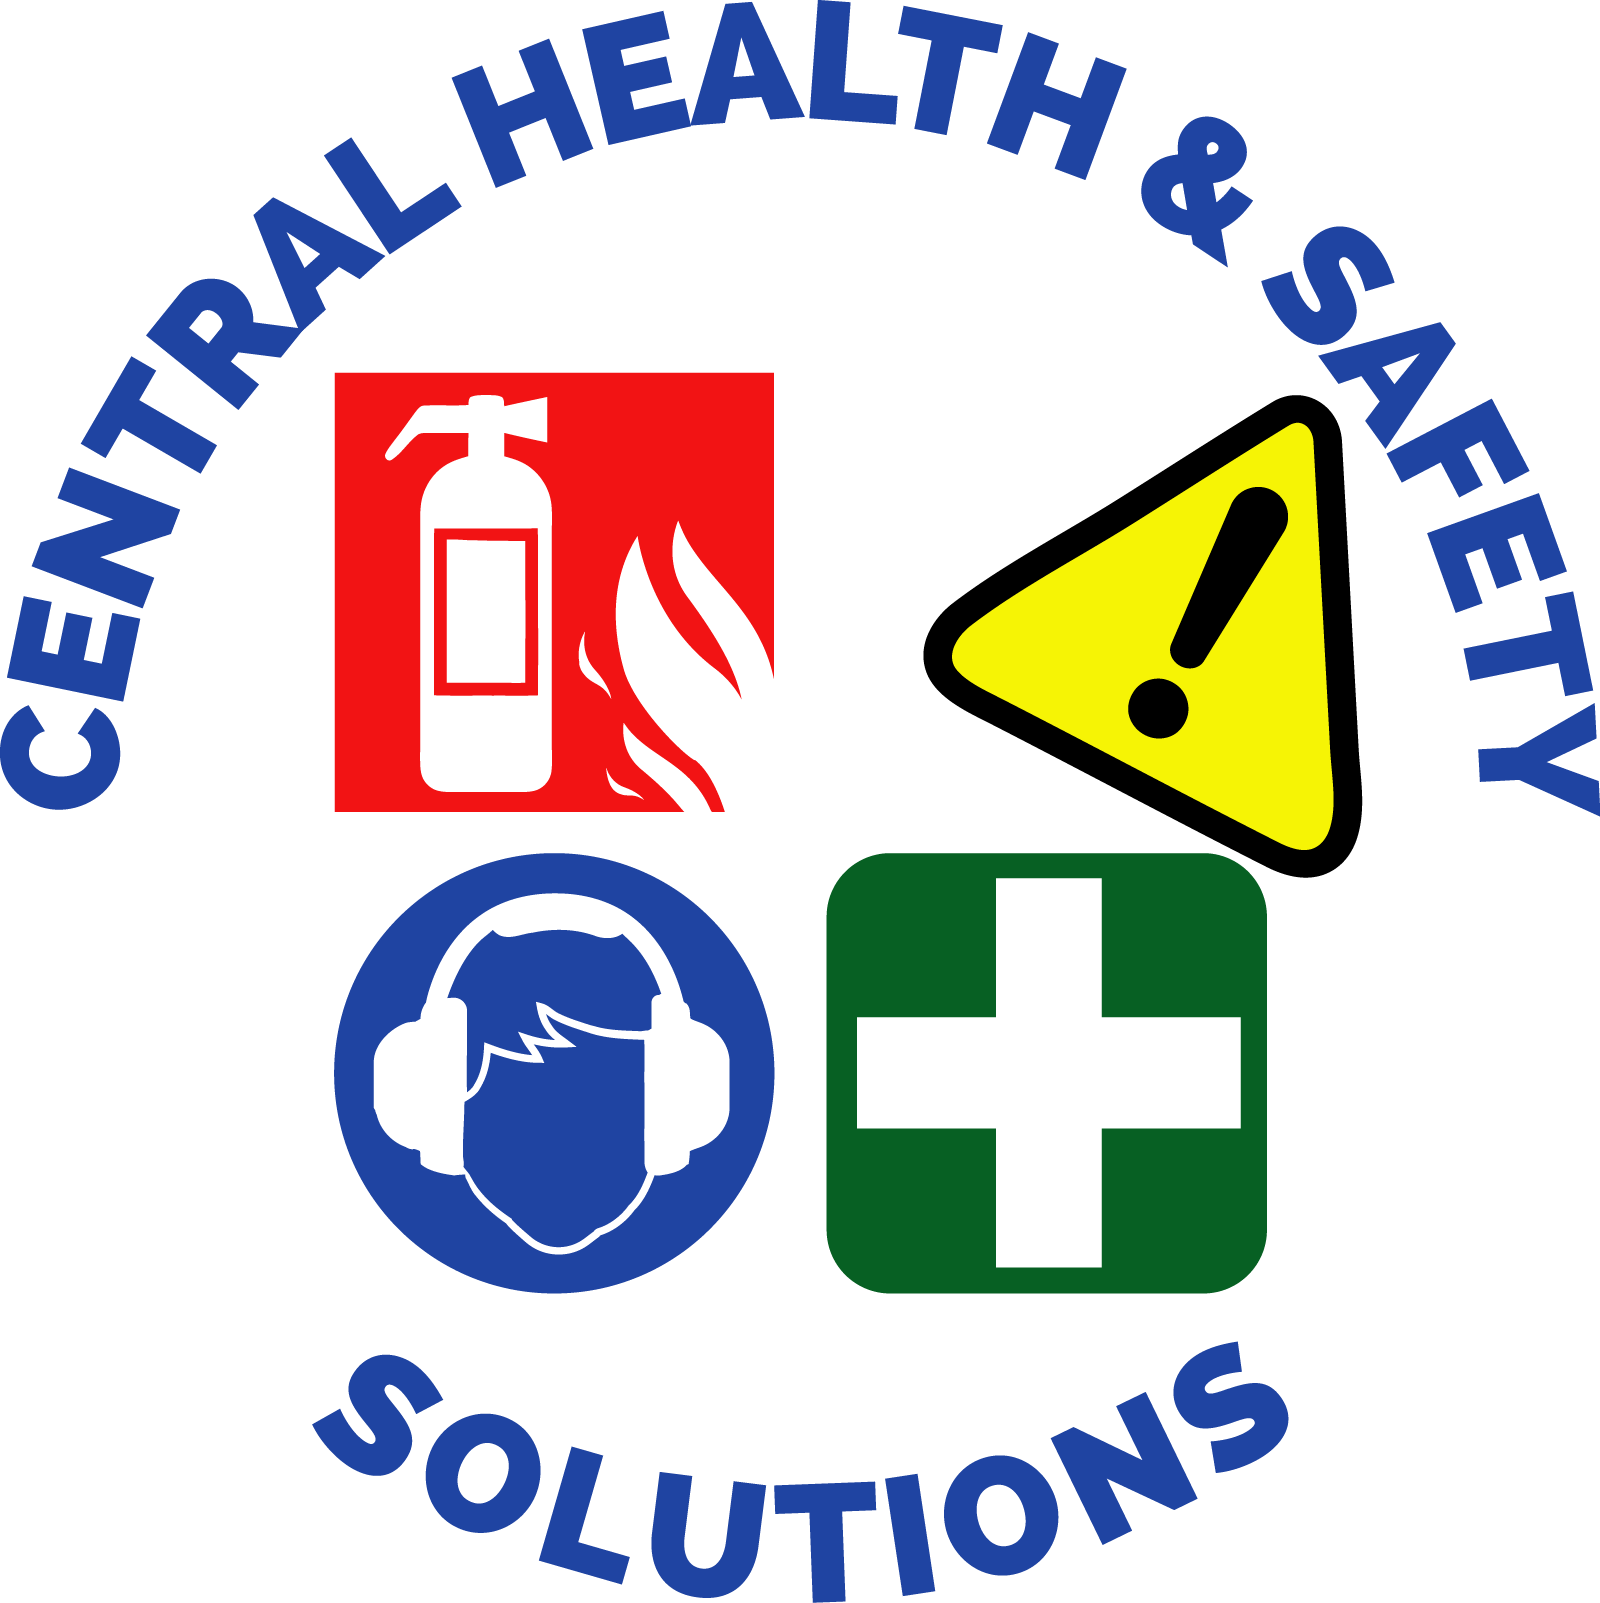 Central Health & Safety Solutions logo